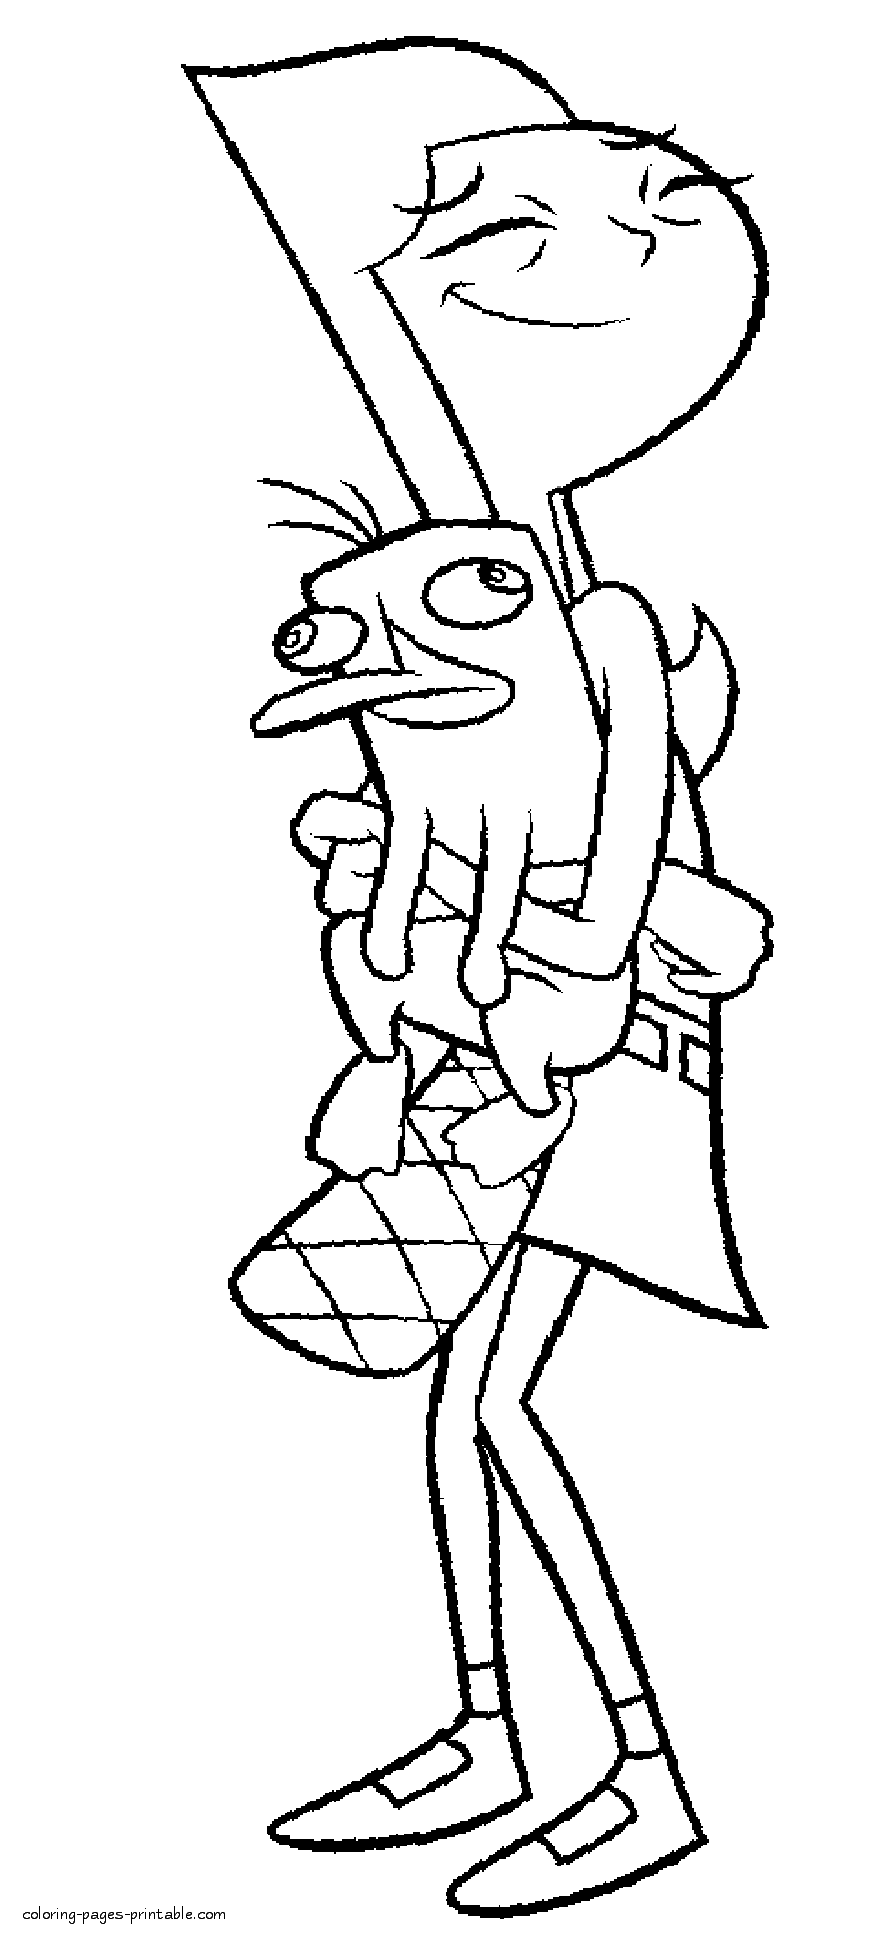 Candace with Perry coloring page from cartoon